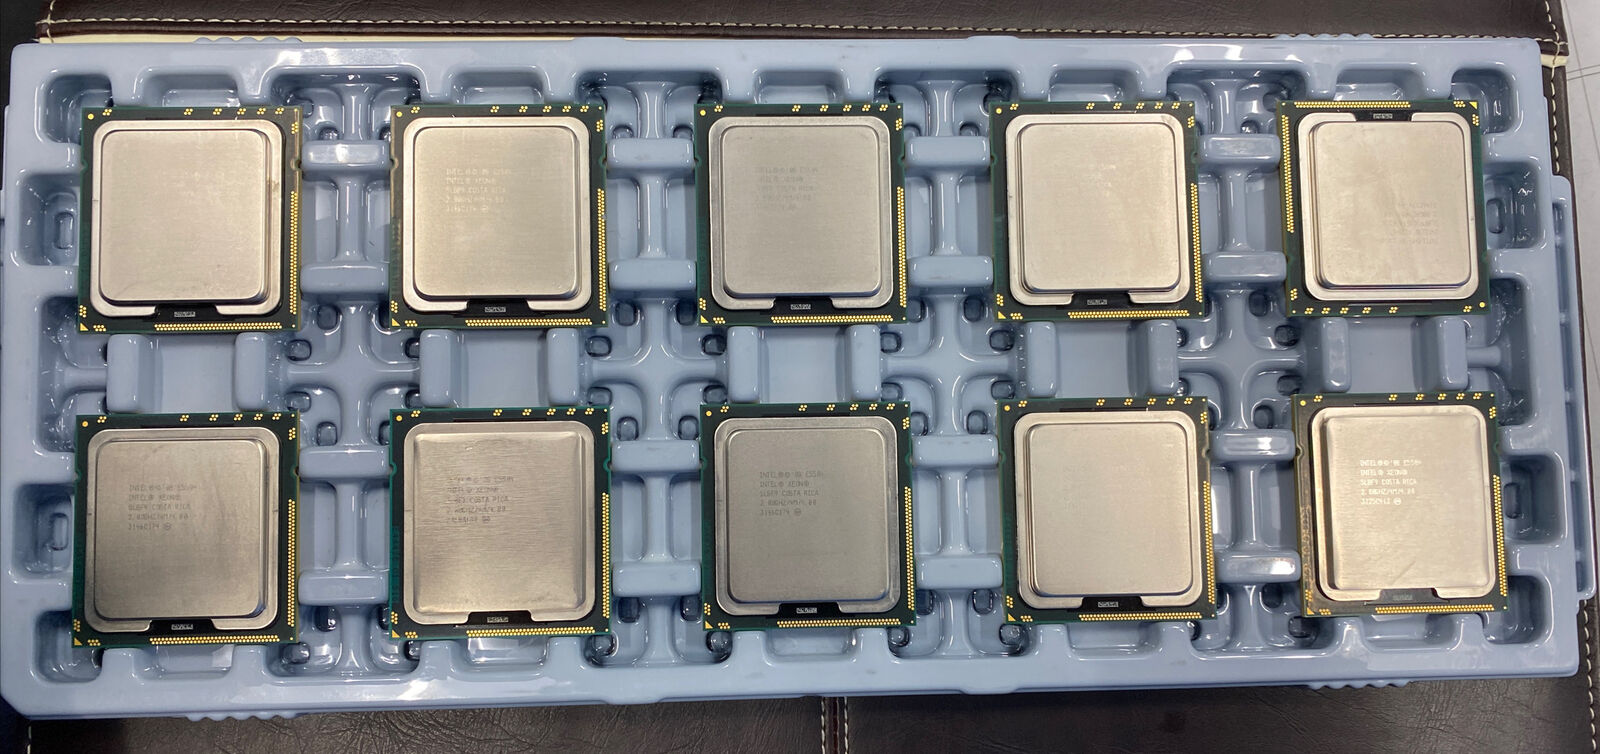 Intel Xeon E5504 2GHz Quad-Core AT80602000801AA New In Tray - sold individually 